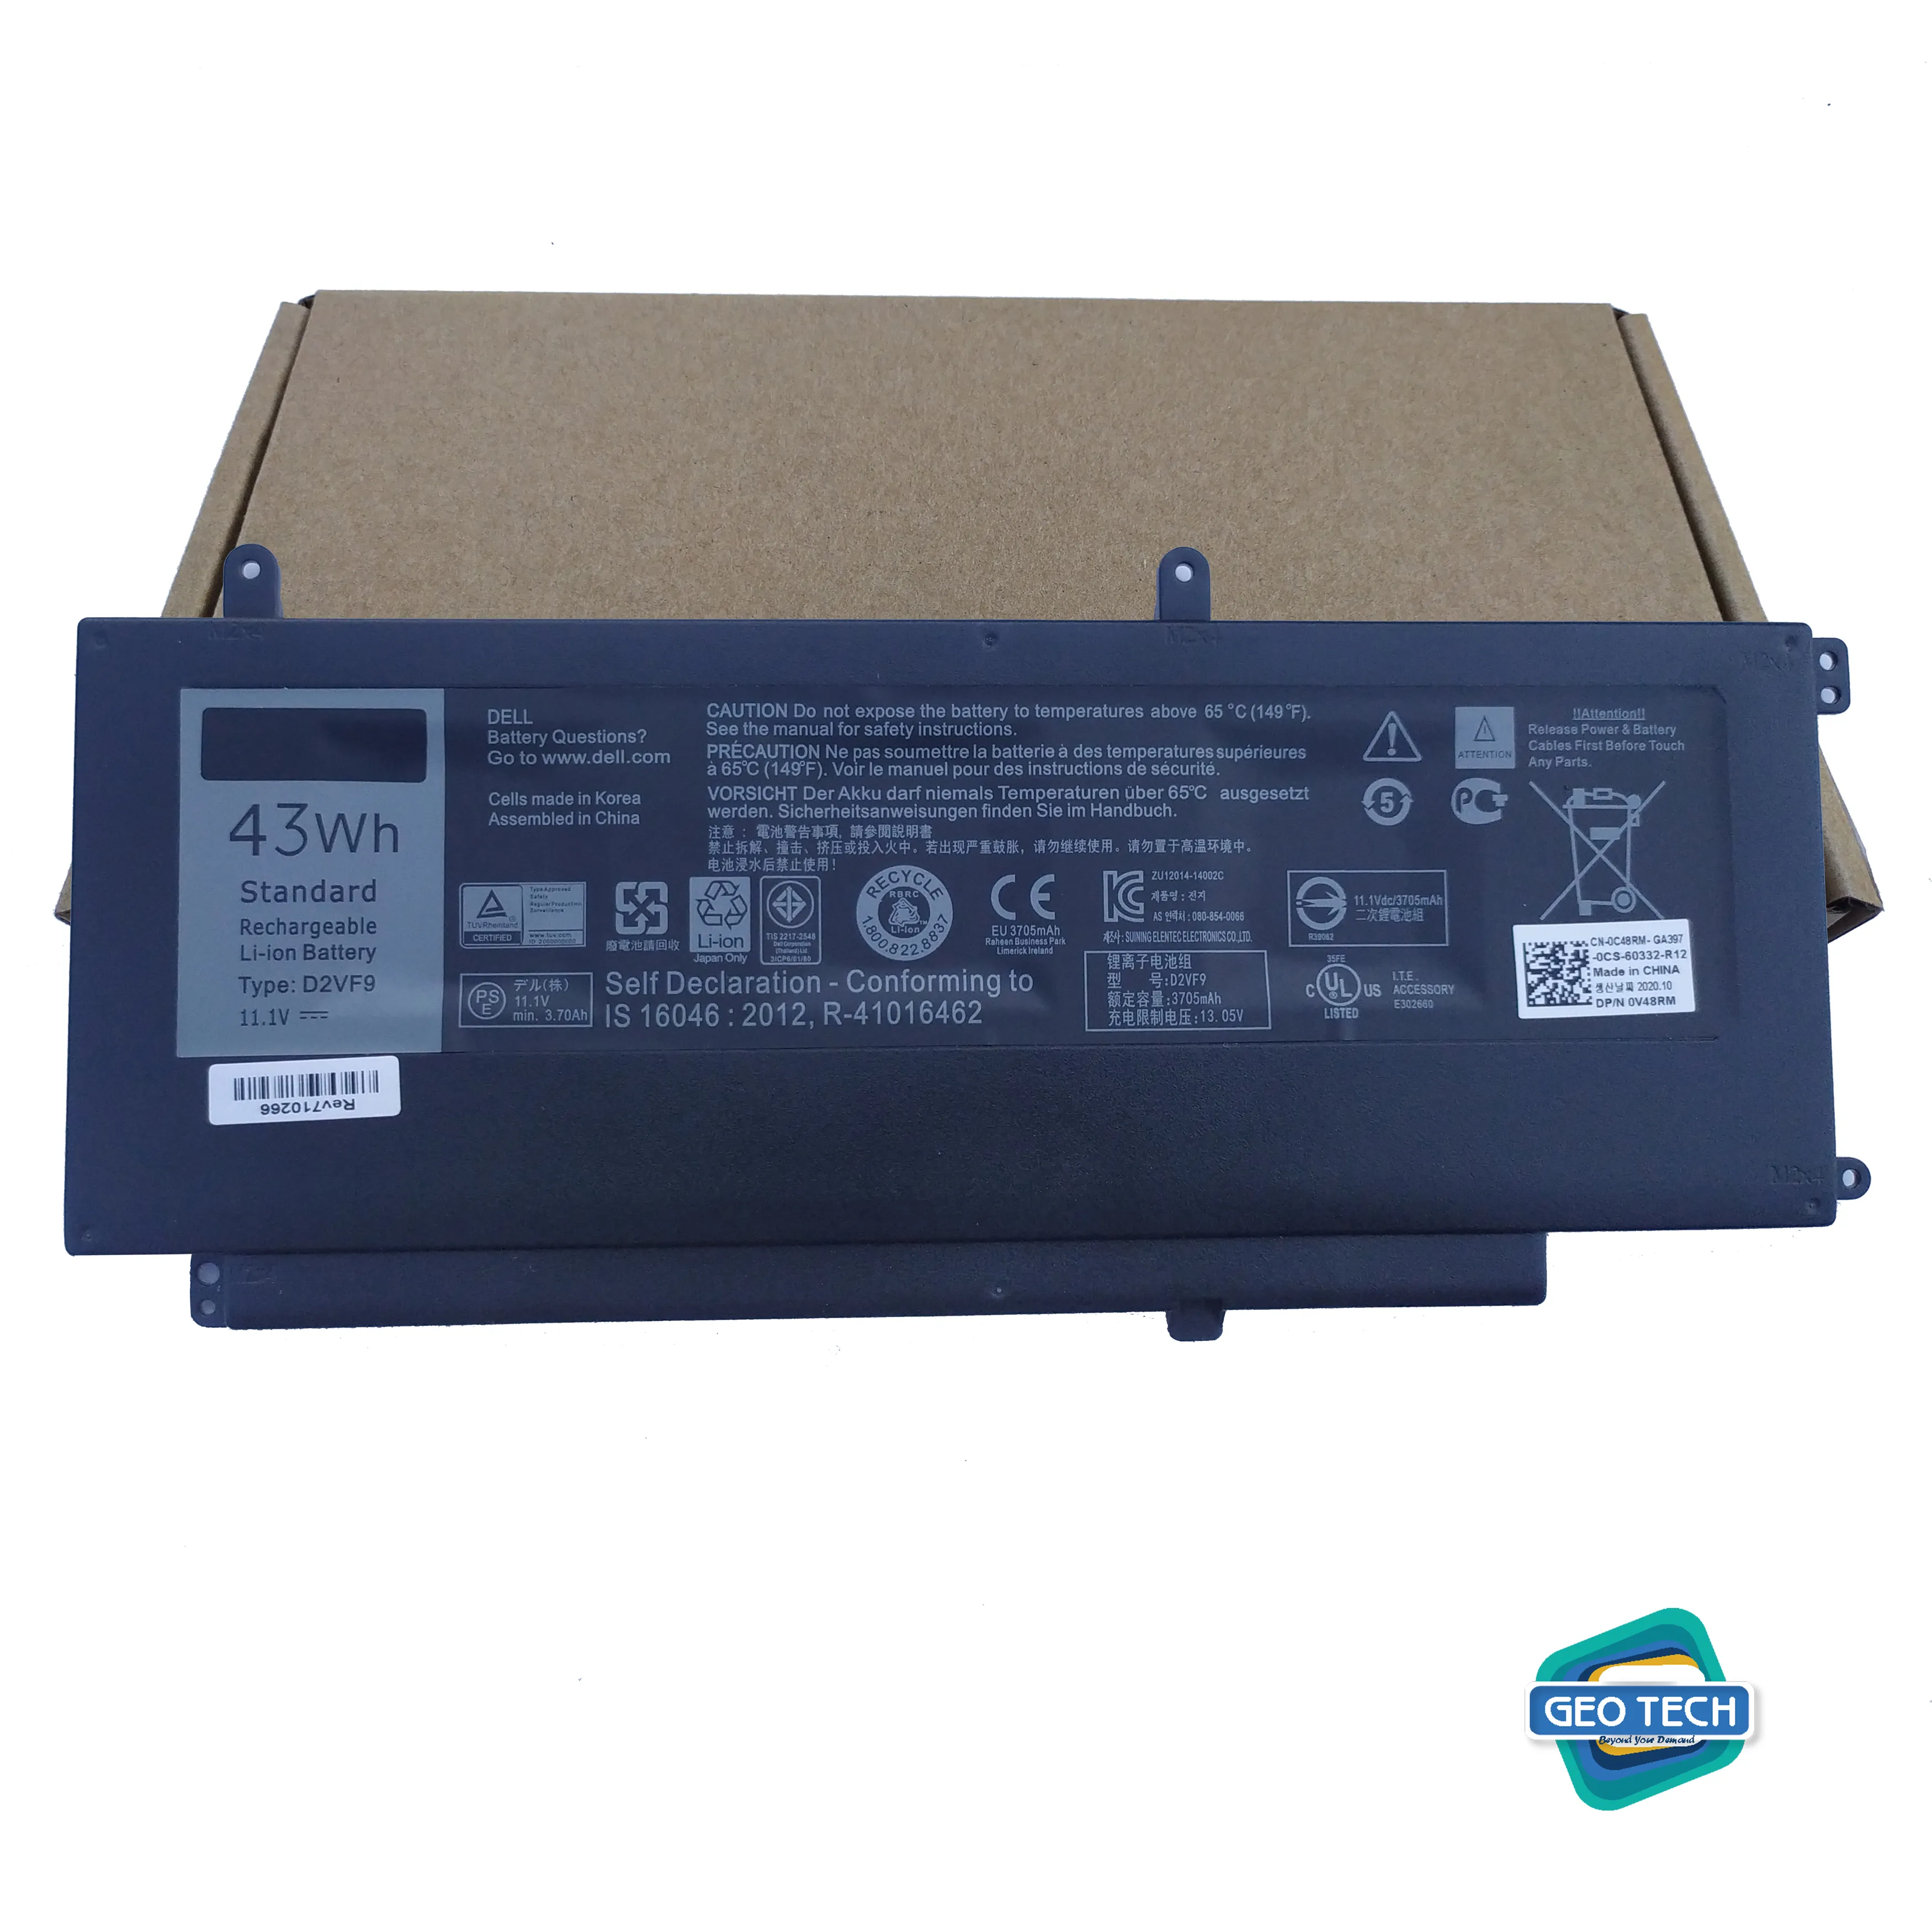 D2VF9 Battery 11.1V 43WH Replacement for Dell Inspiron 15 7547 7548 0PXR51 PXR51